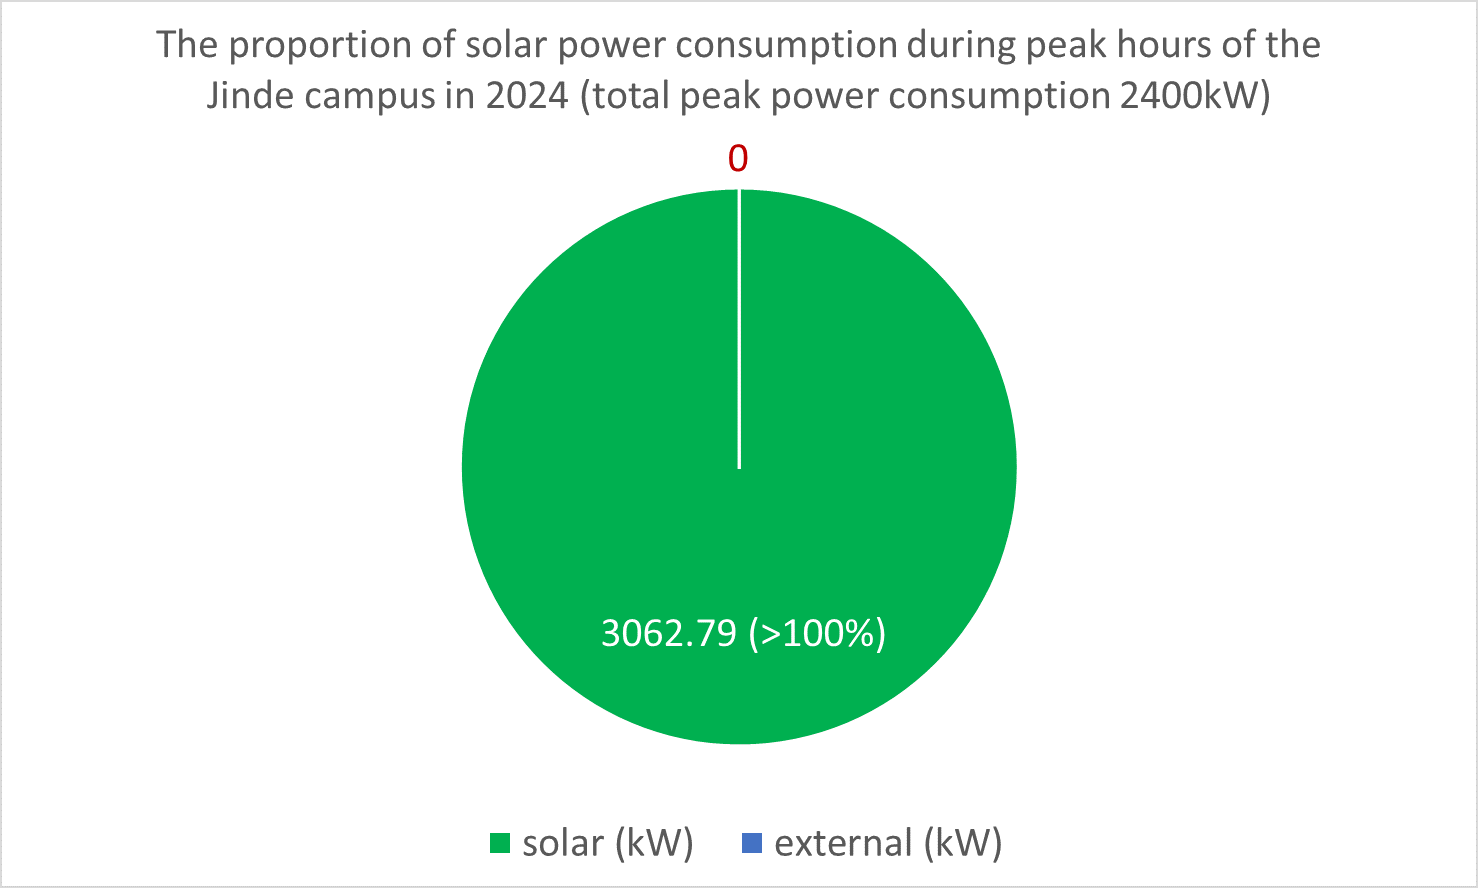 Figure 4. The proportion of solar power consumption during peak hours of the Jinde campus in 2024